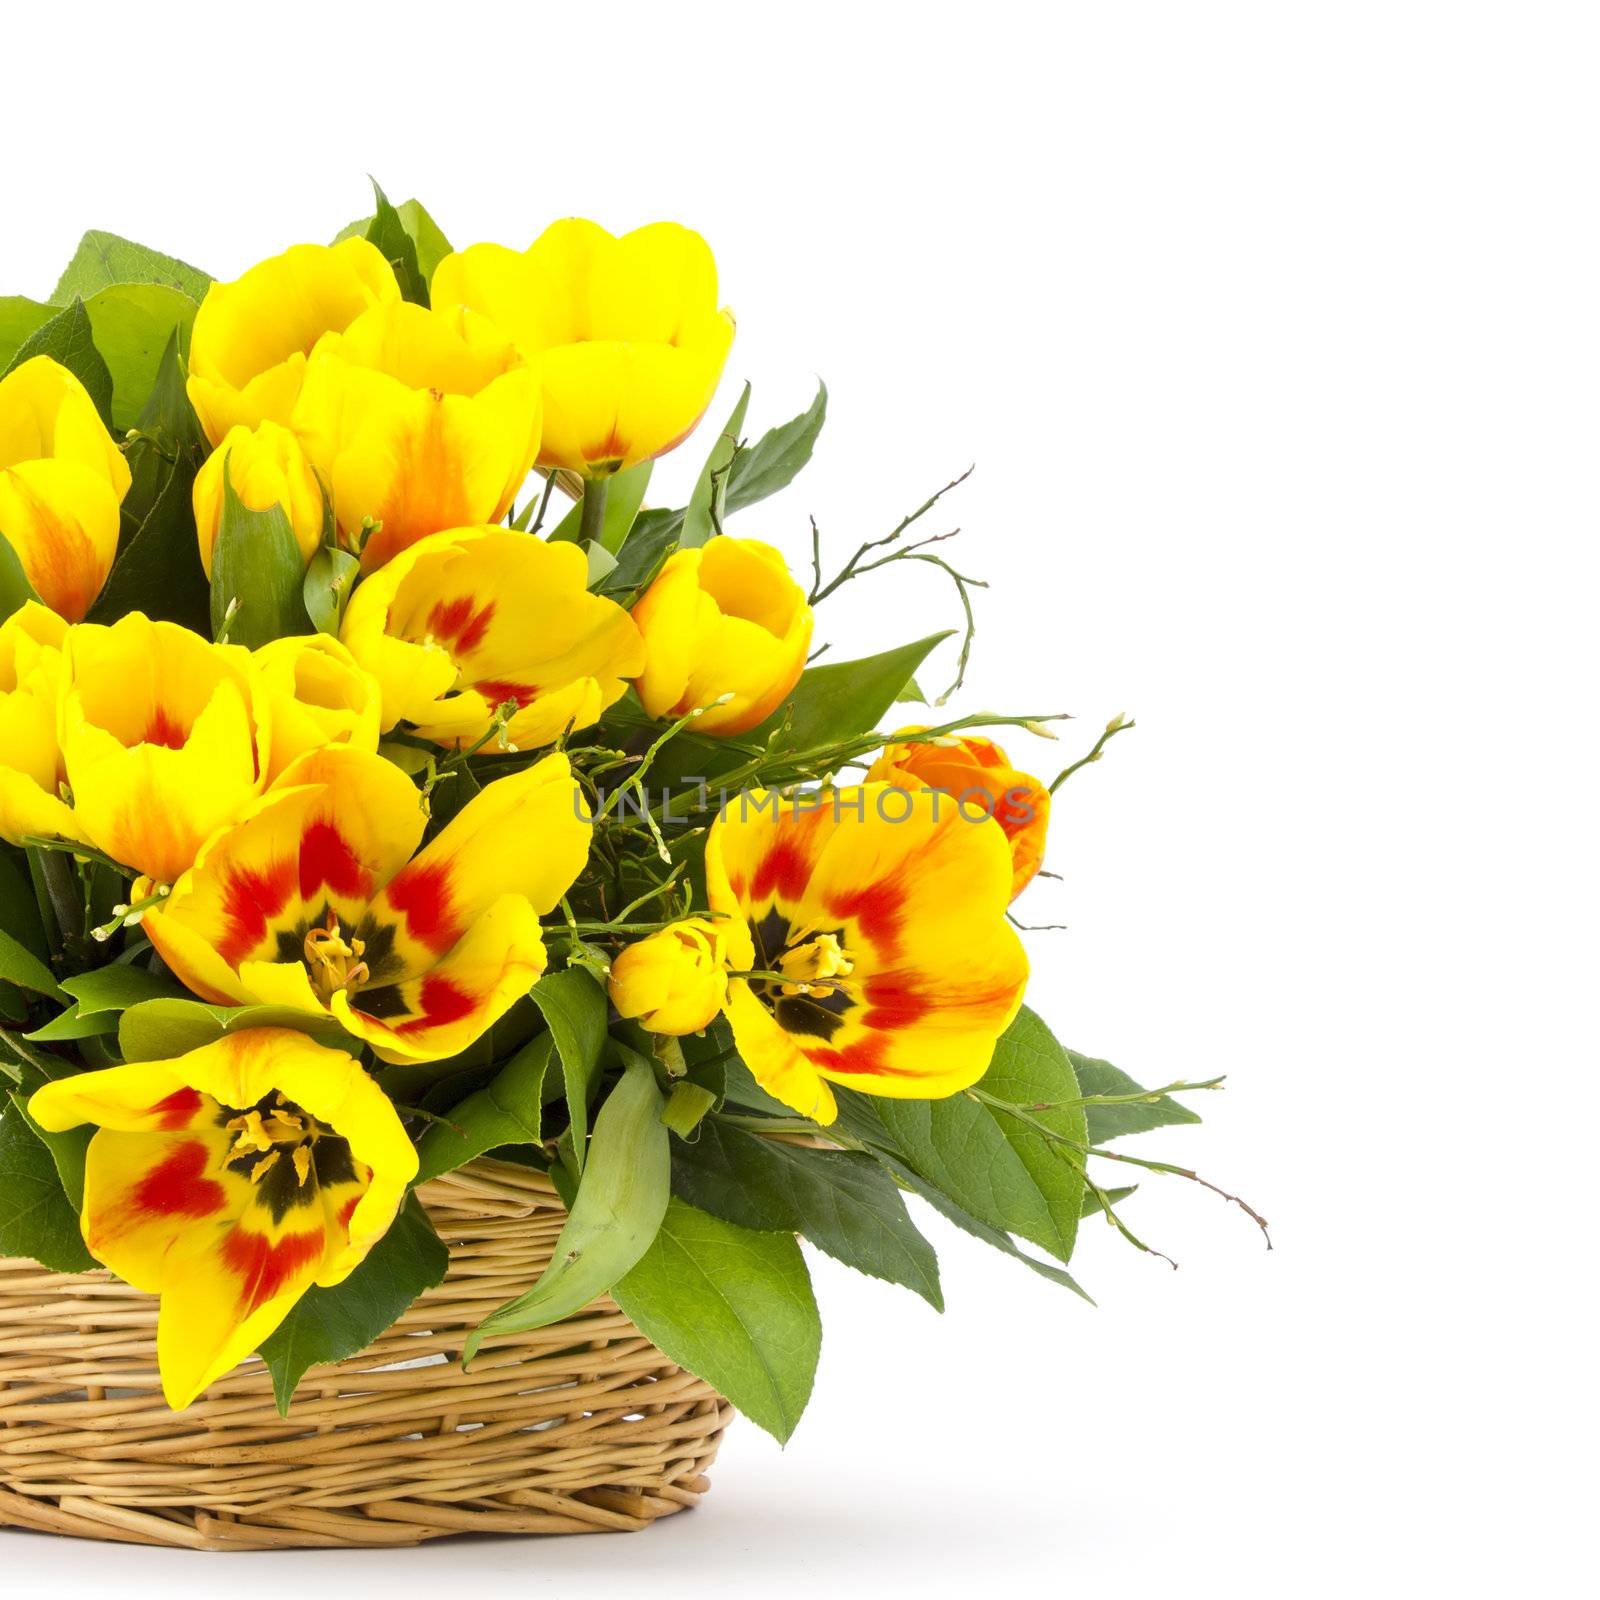 yellow tulips in a basket on a white background  by miradrozdowski